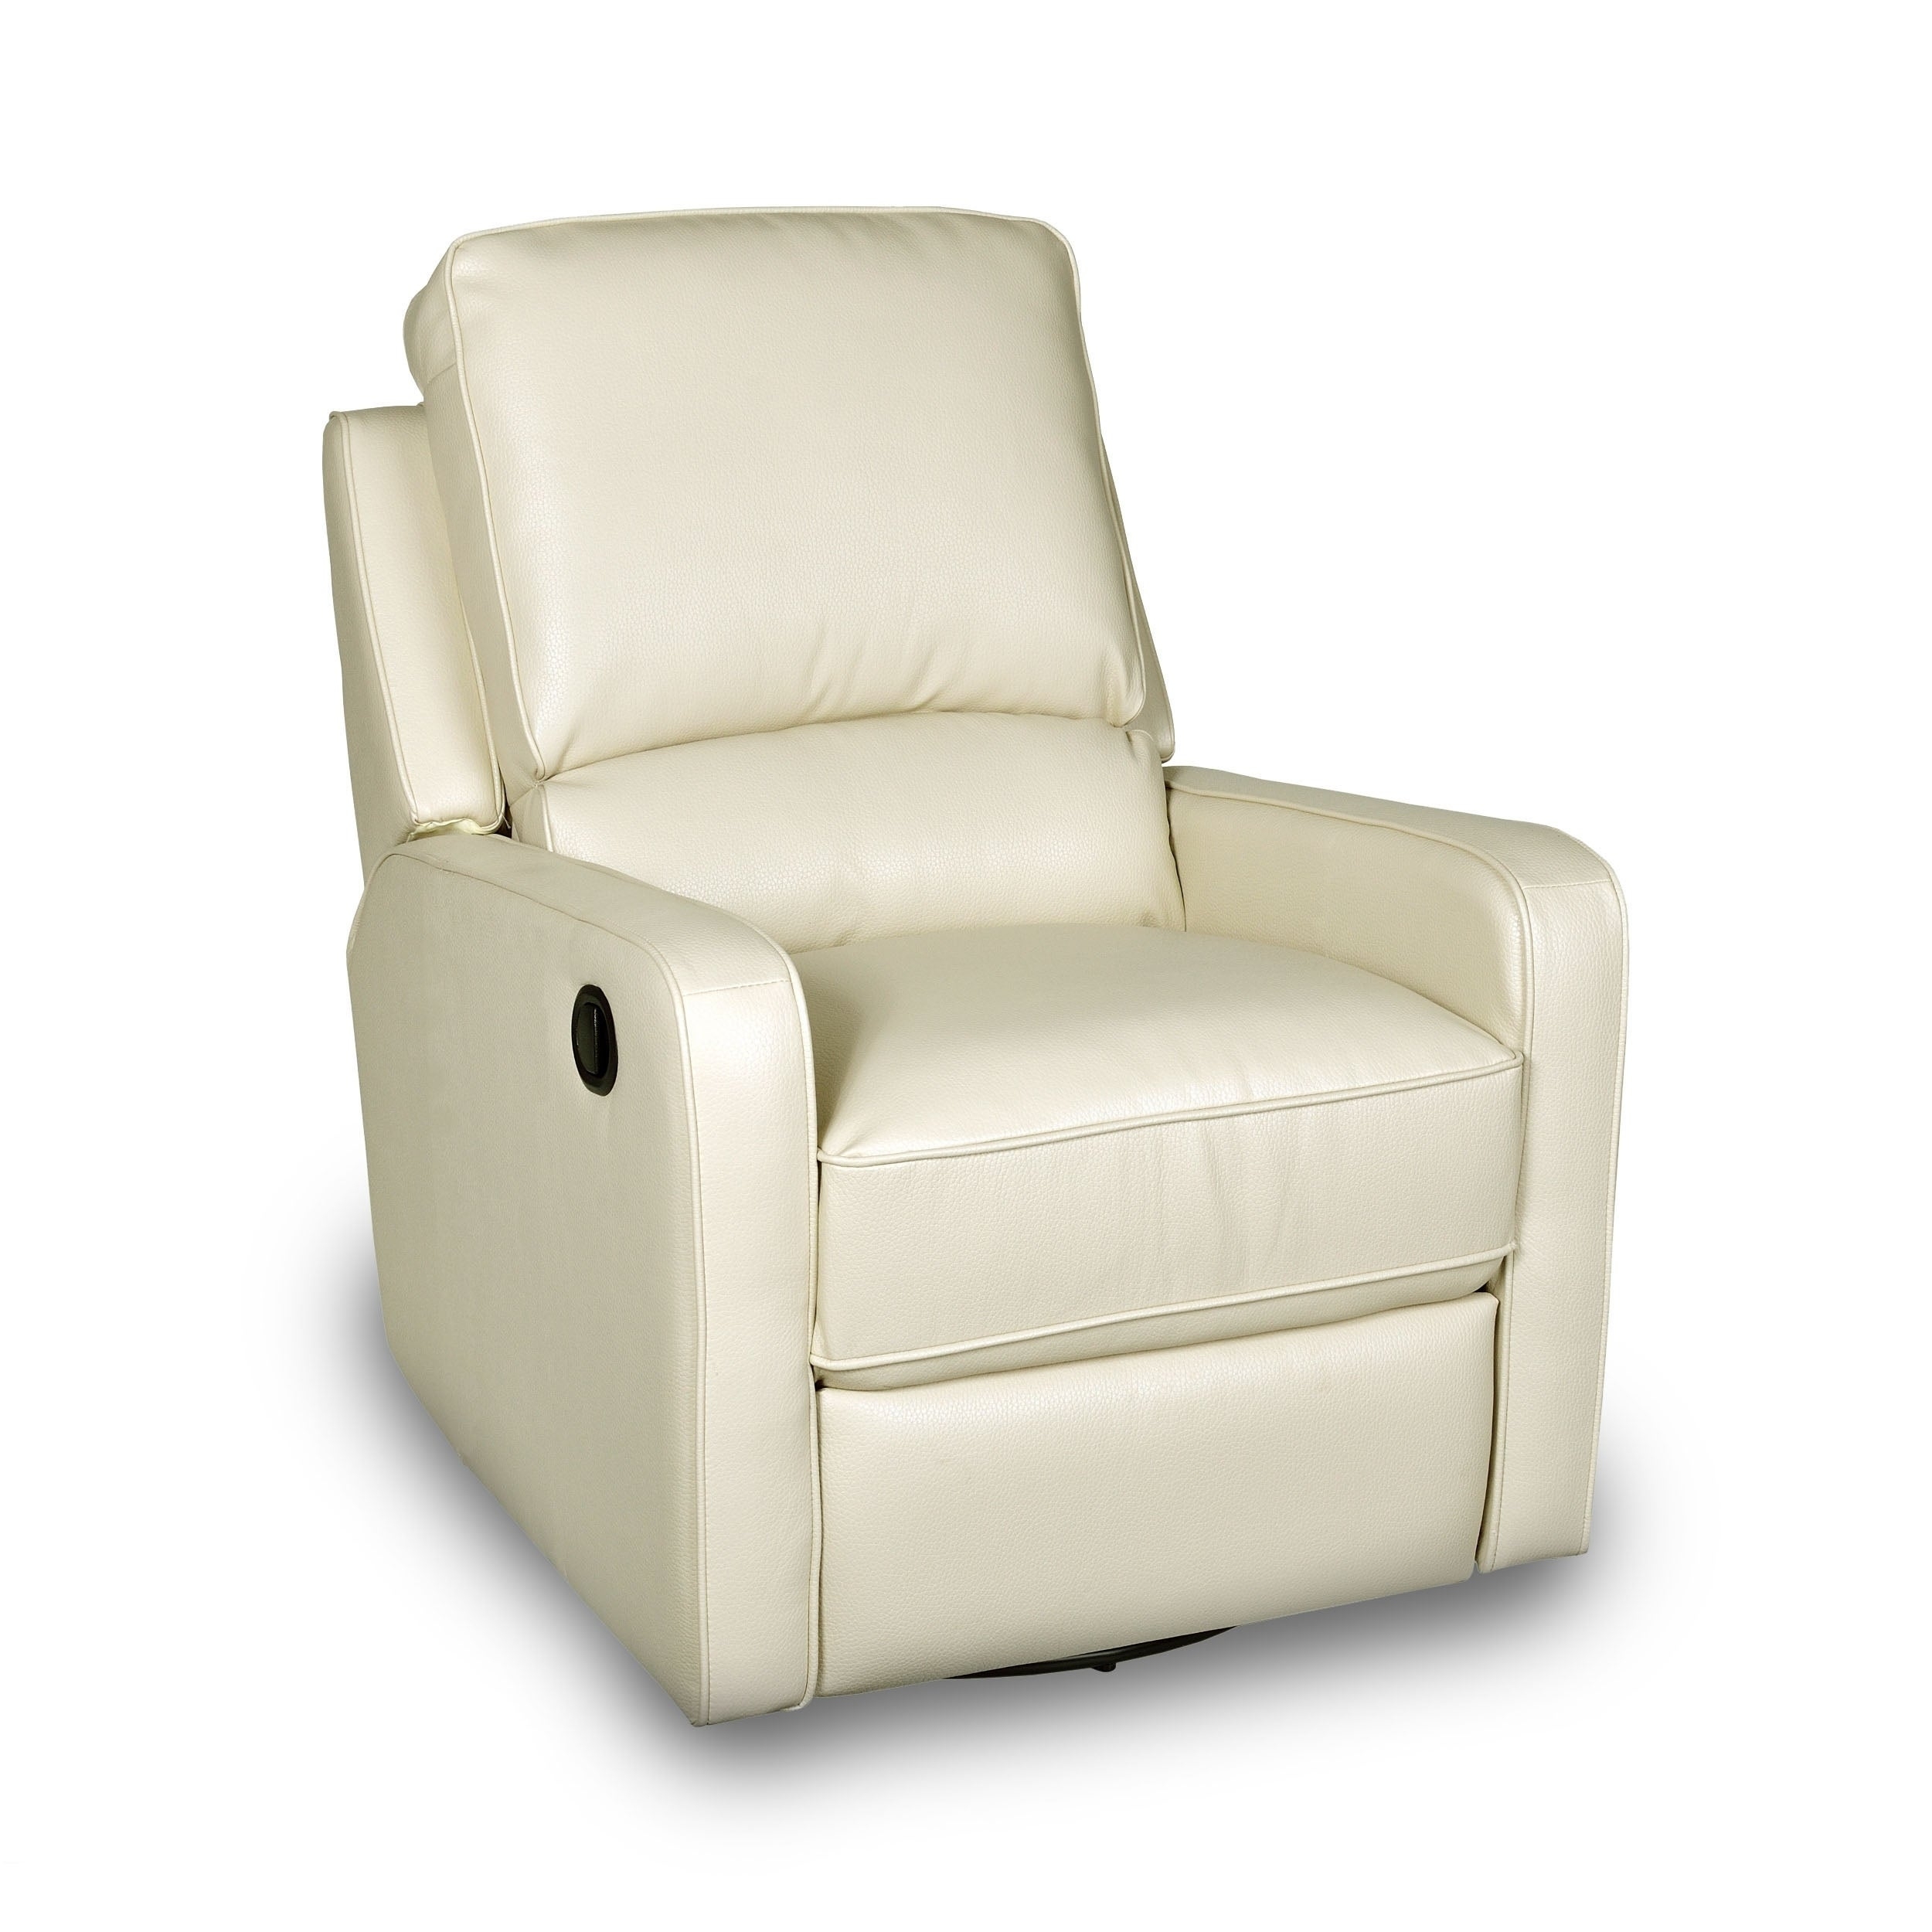 Perth leather swivel glider recliner shopping the best deals on